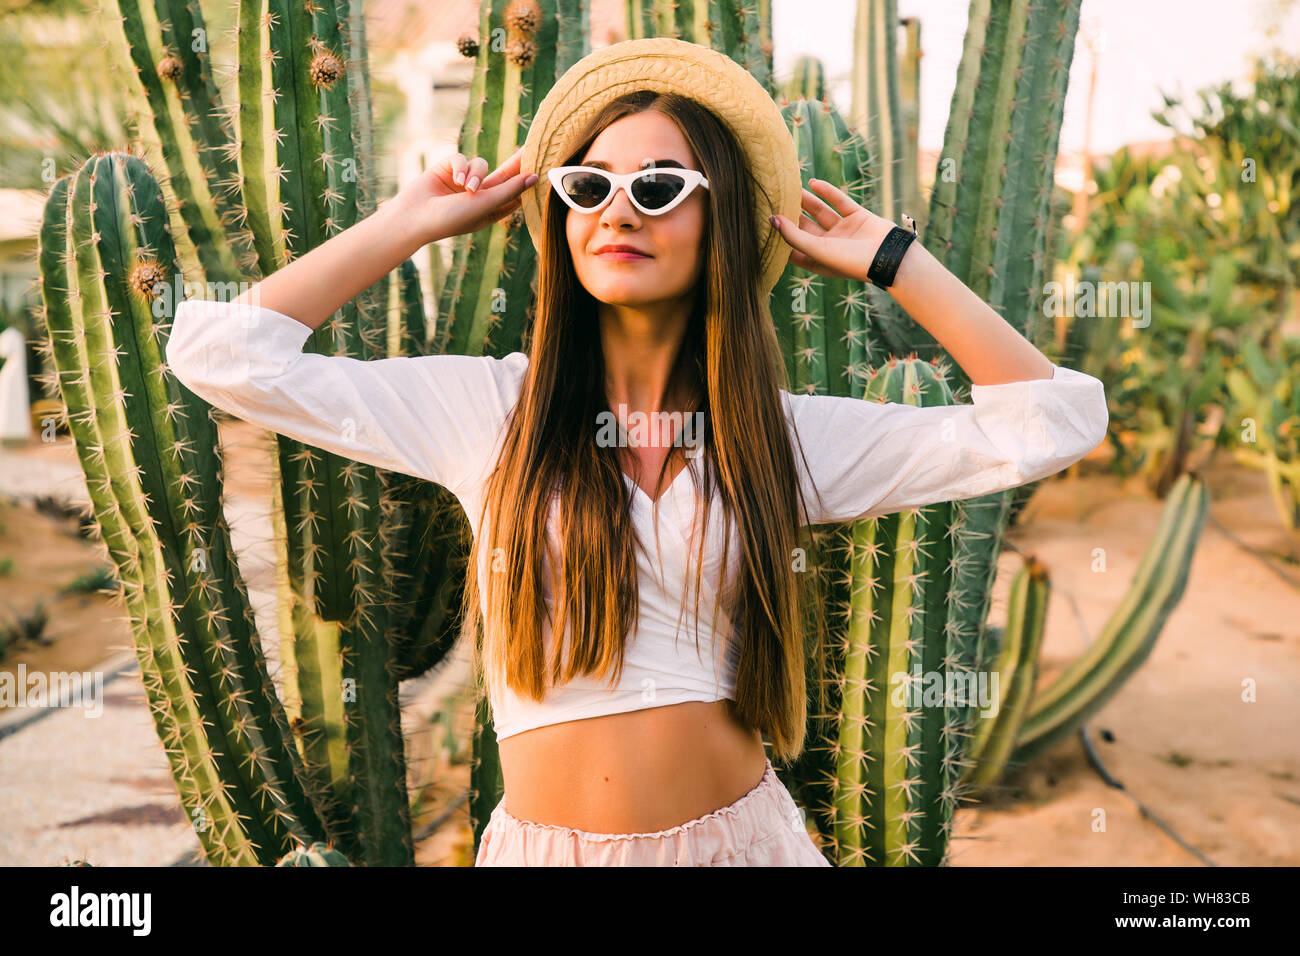 Hippie woman in long pink skirt walking near big cactuses Stock Photo